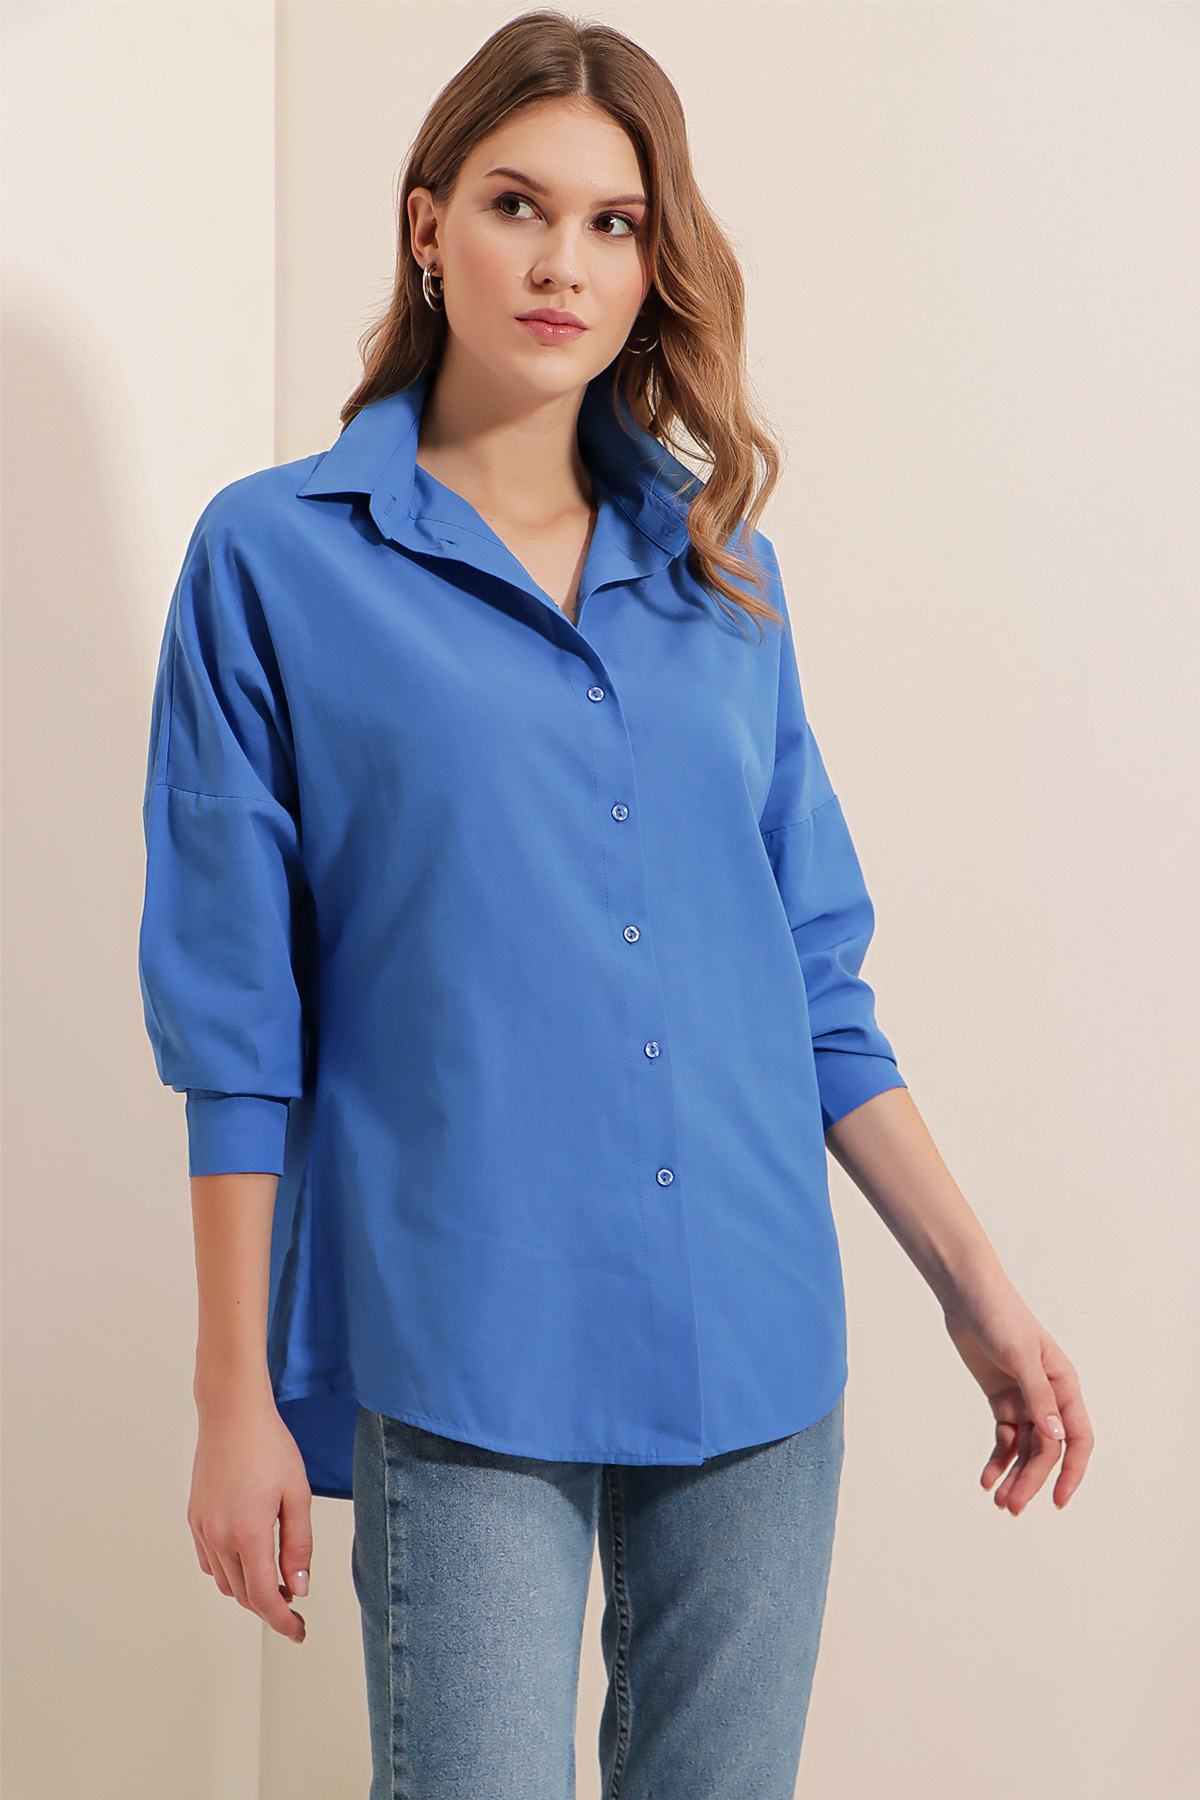 A model wears 46617 - Shirt - Blue, wholesale Shirt of Bigdart to display at Lonca